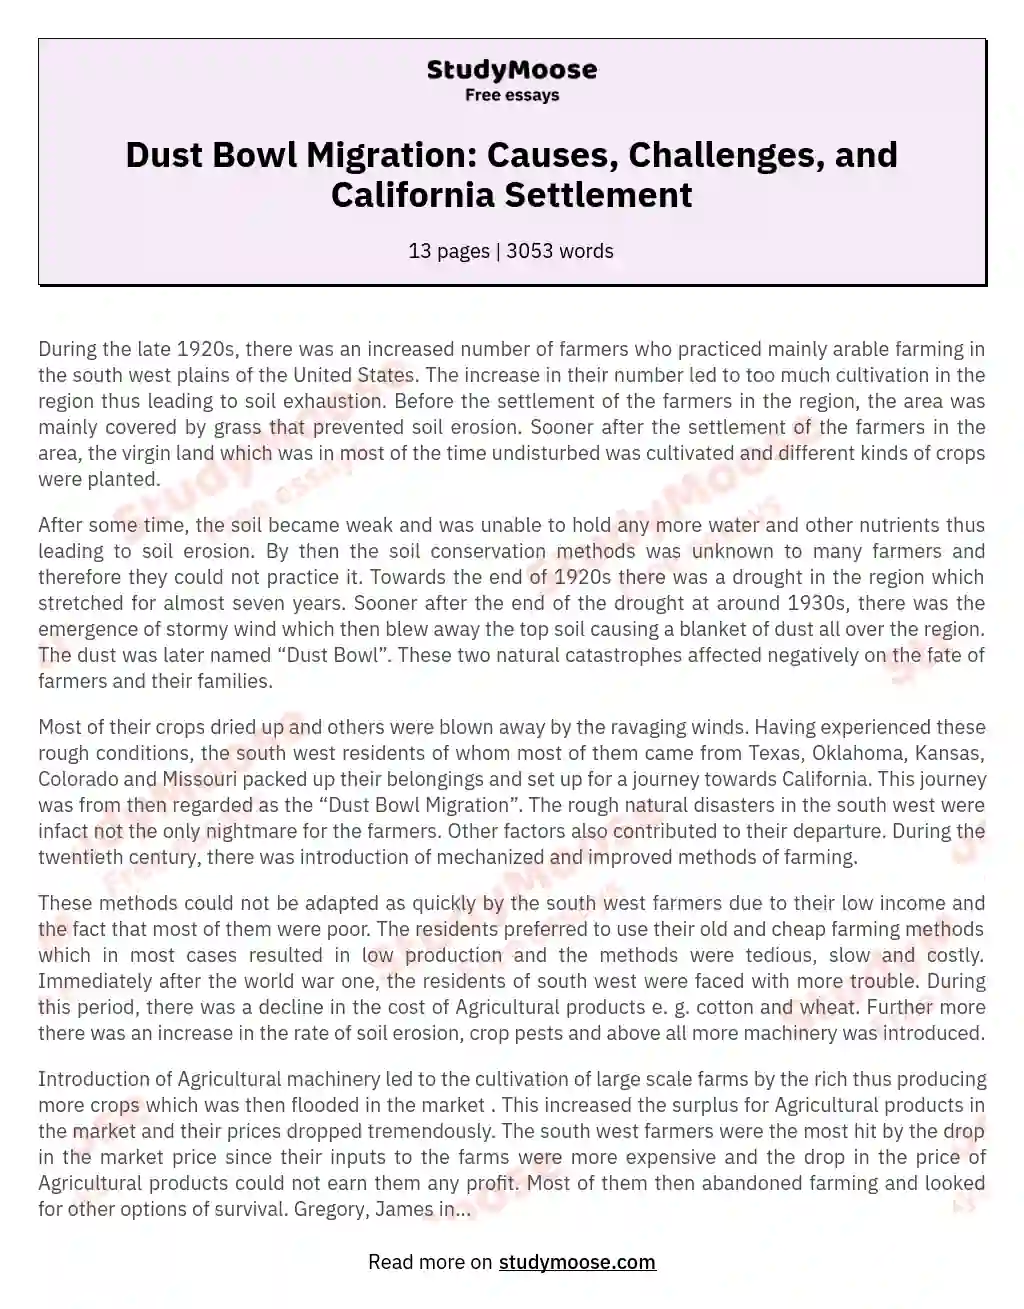 Dust Bowl Migration: Causes, Challenges, and California Settlement essay